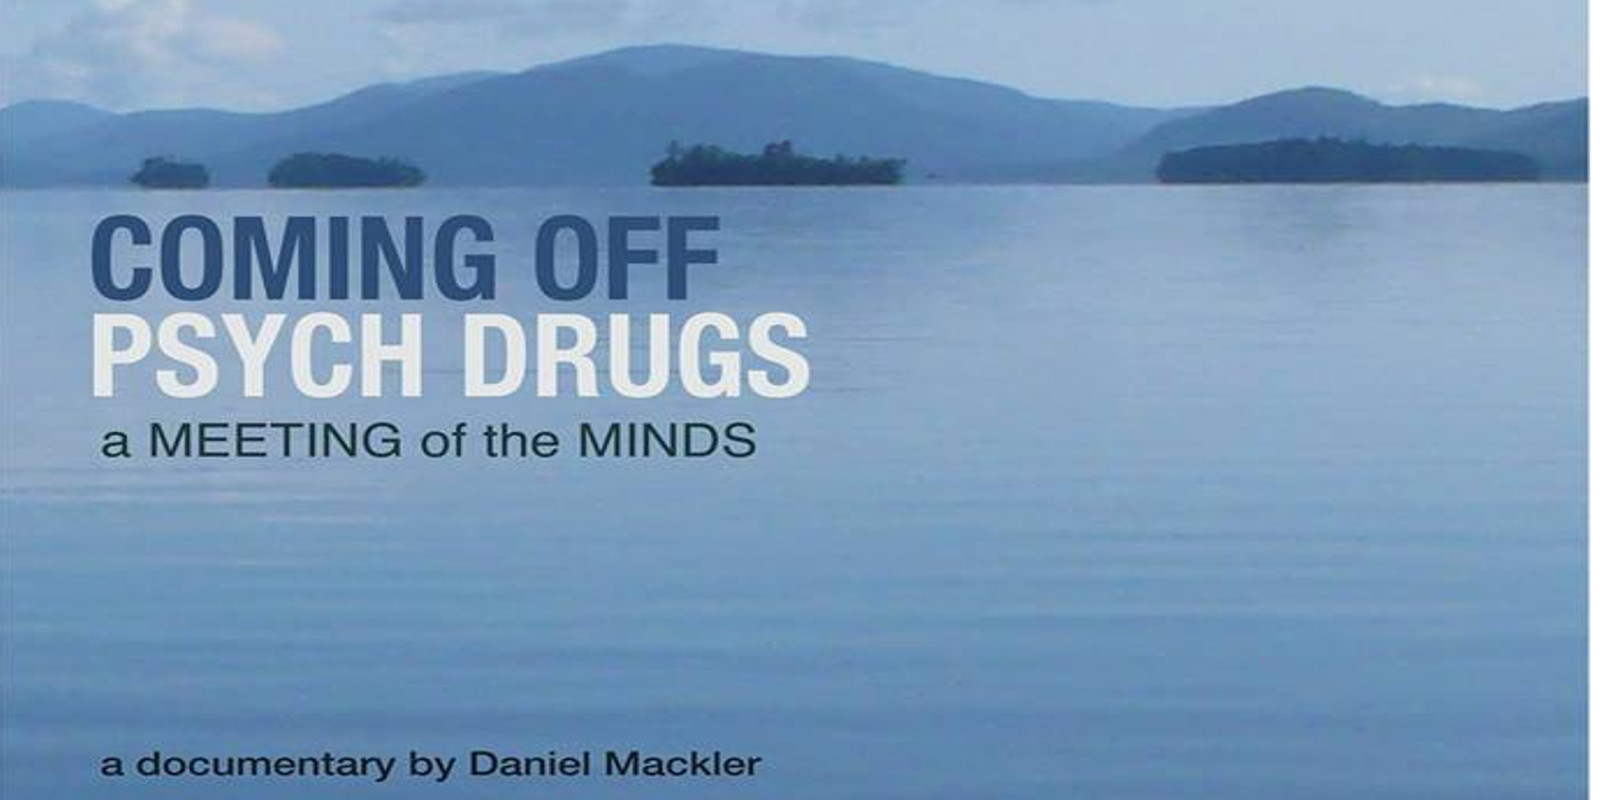 Film and Discussion with Filmmaker: Daniel Mackler's _Coming Off Psych Drugs_